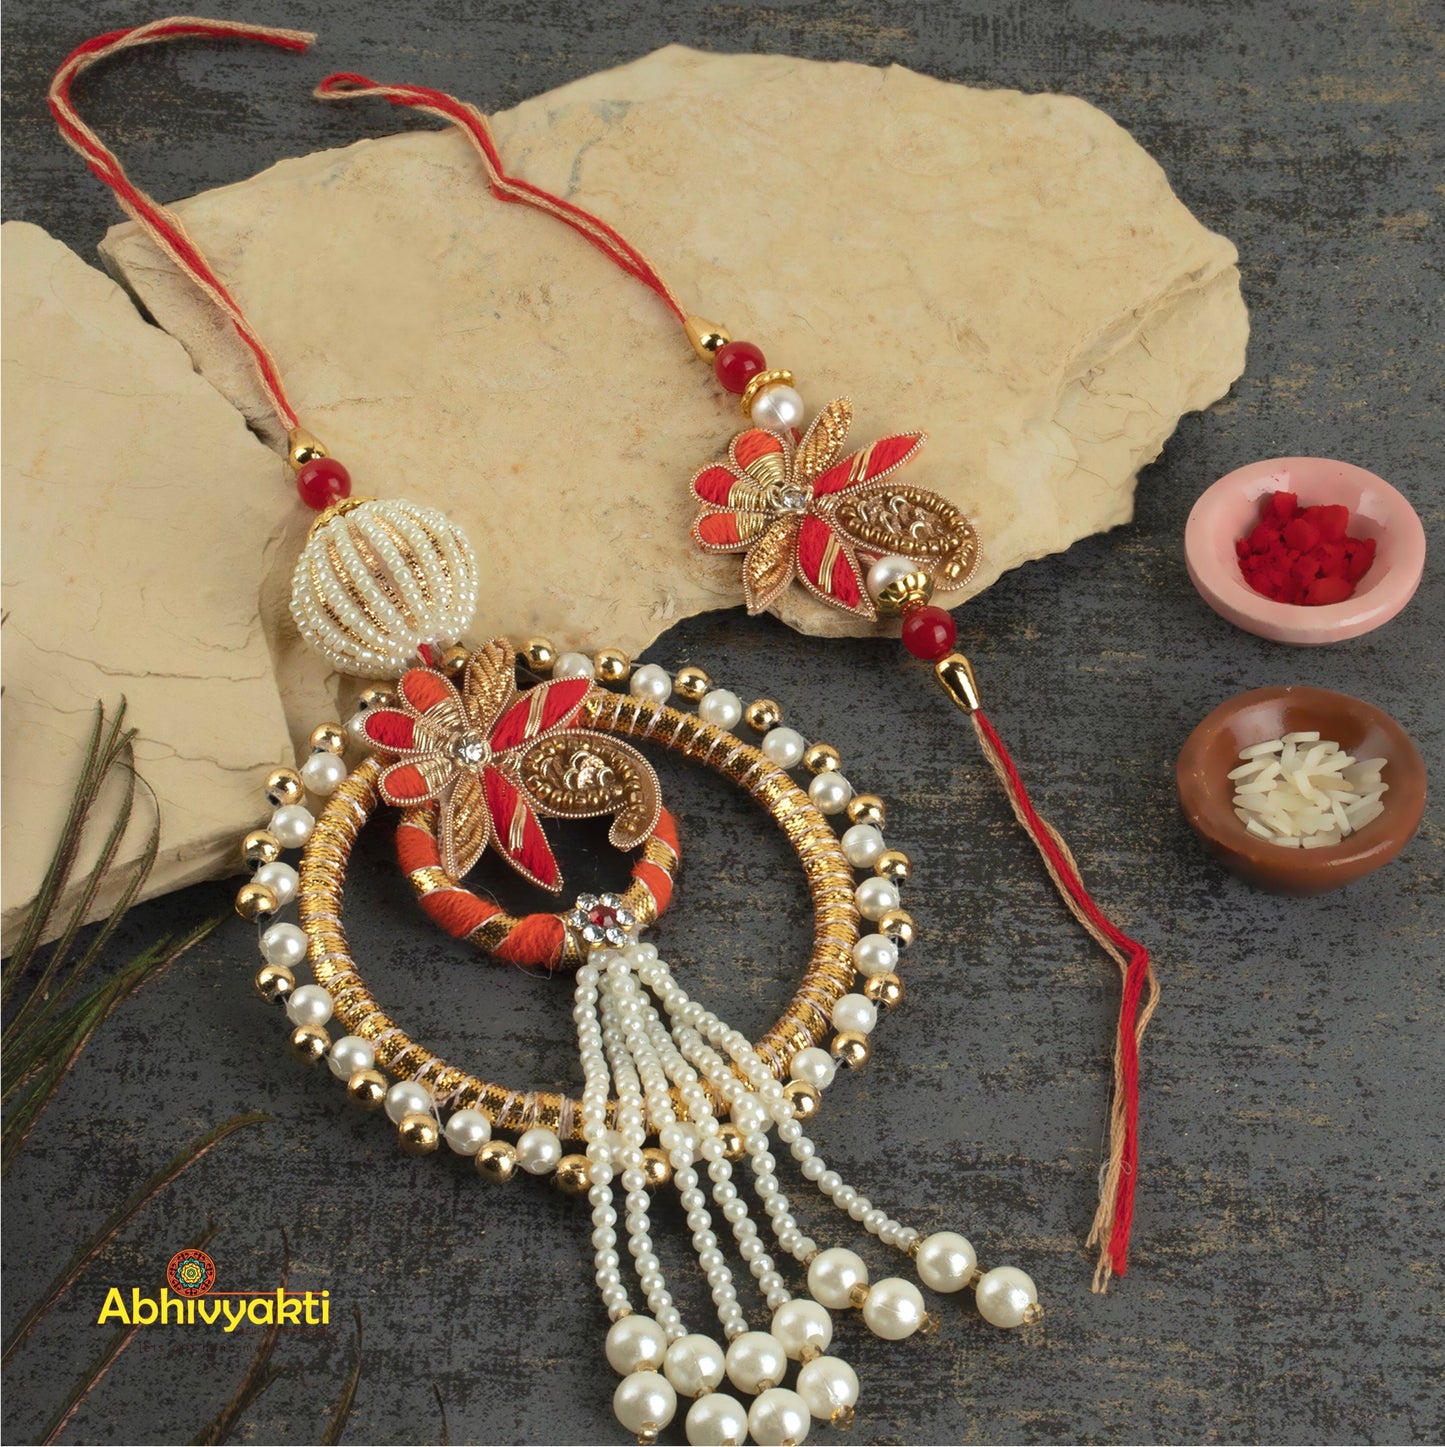 Elegant red and white rakhi featuring pearls and beads, a decorative lumba rakhi with stones & beads.